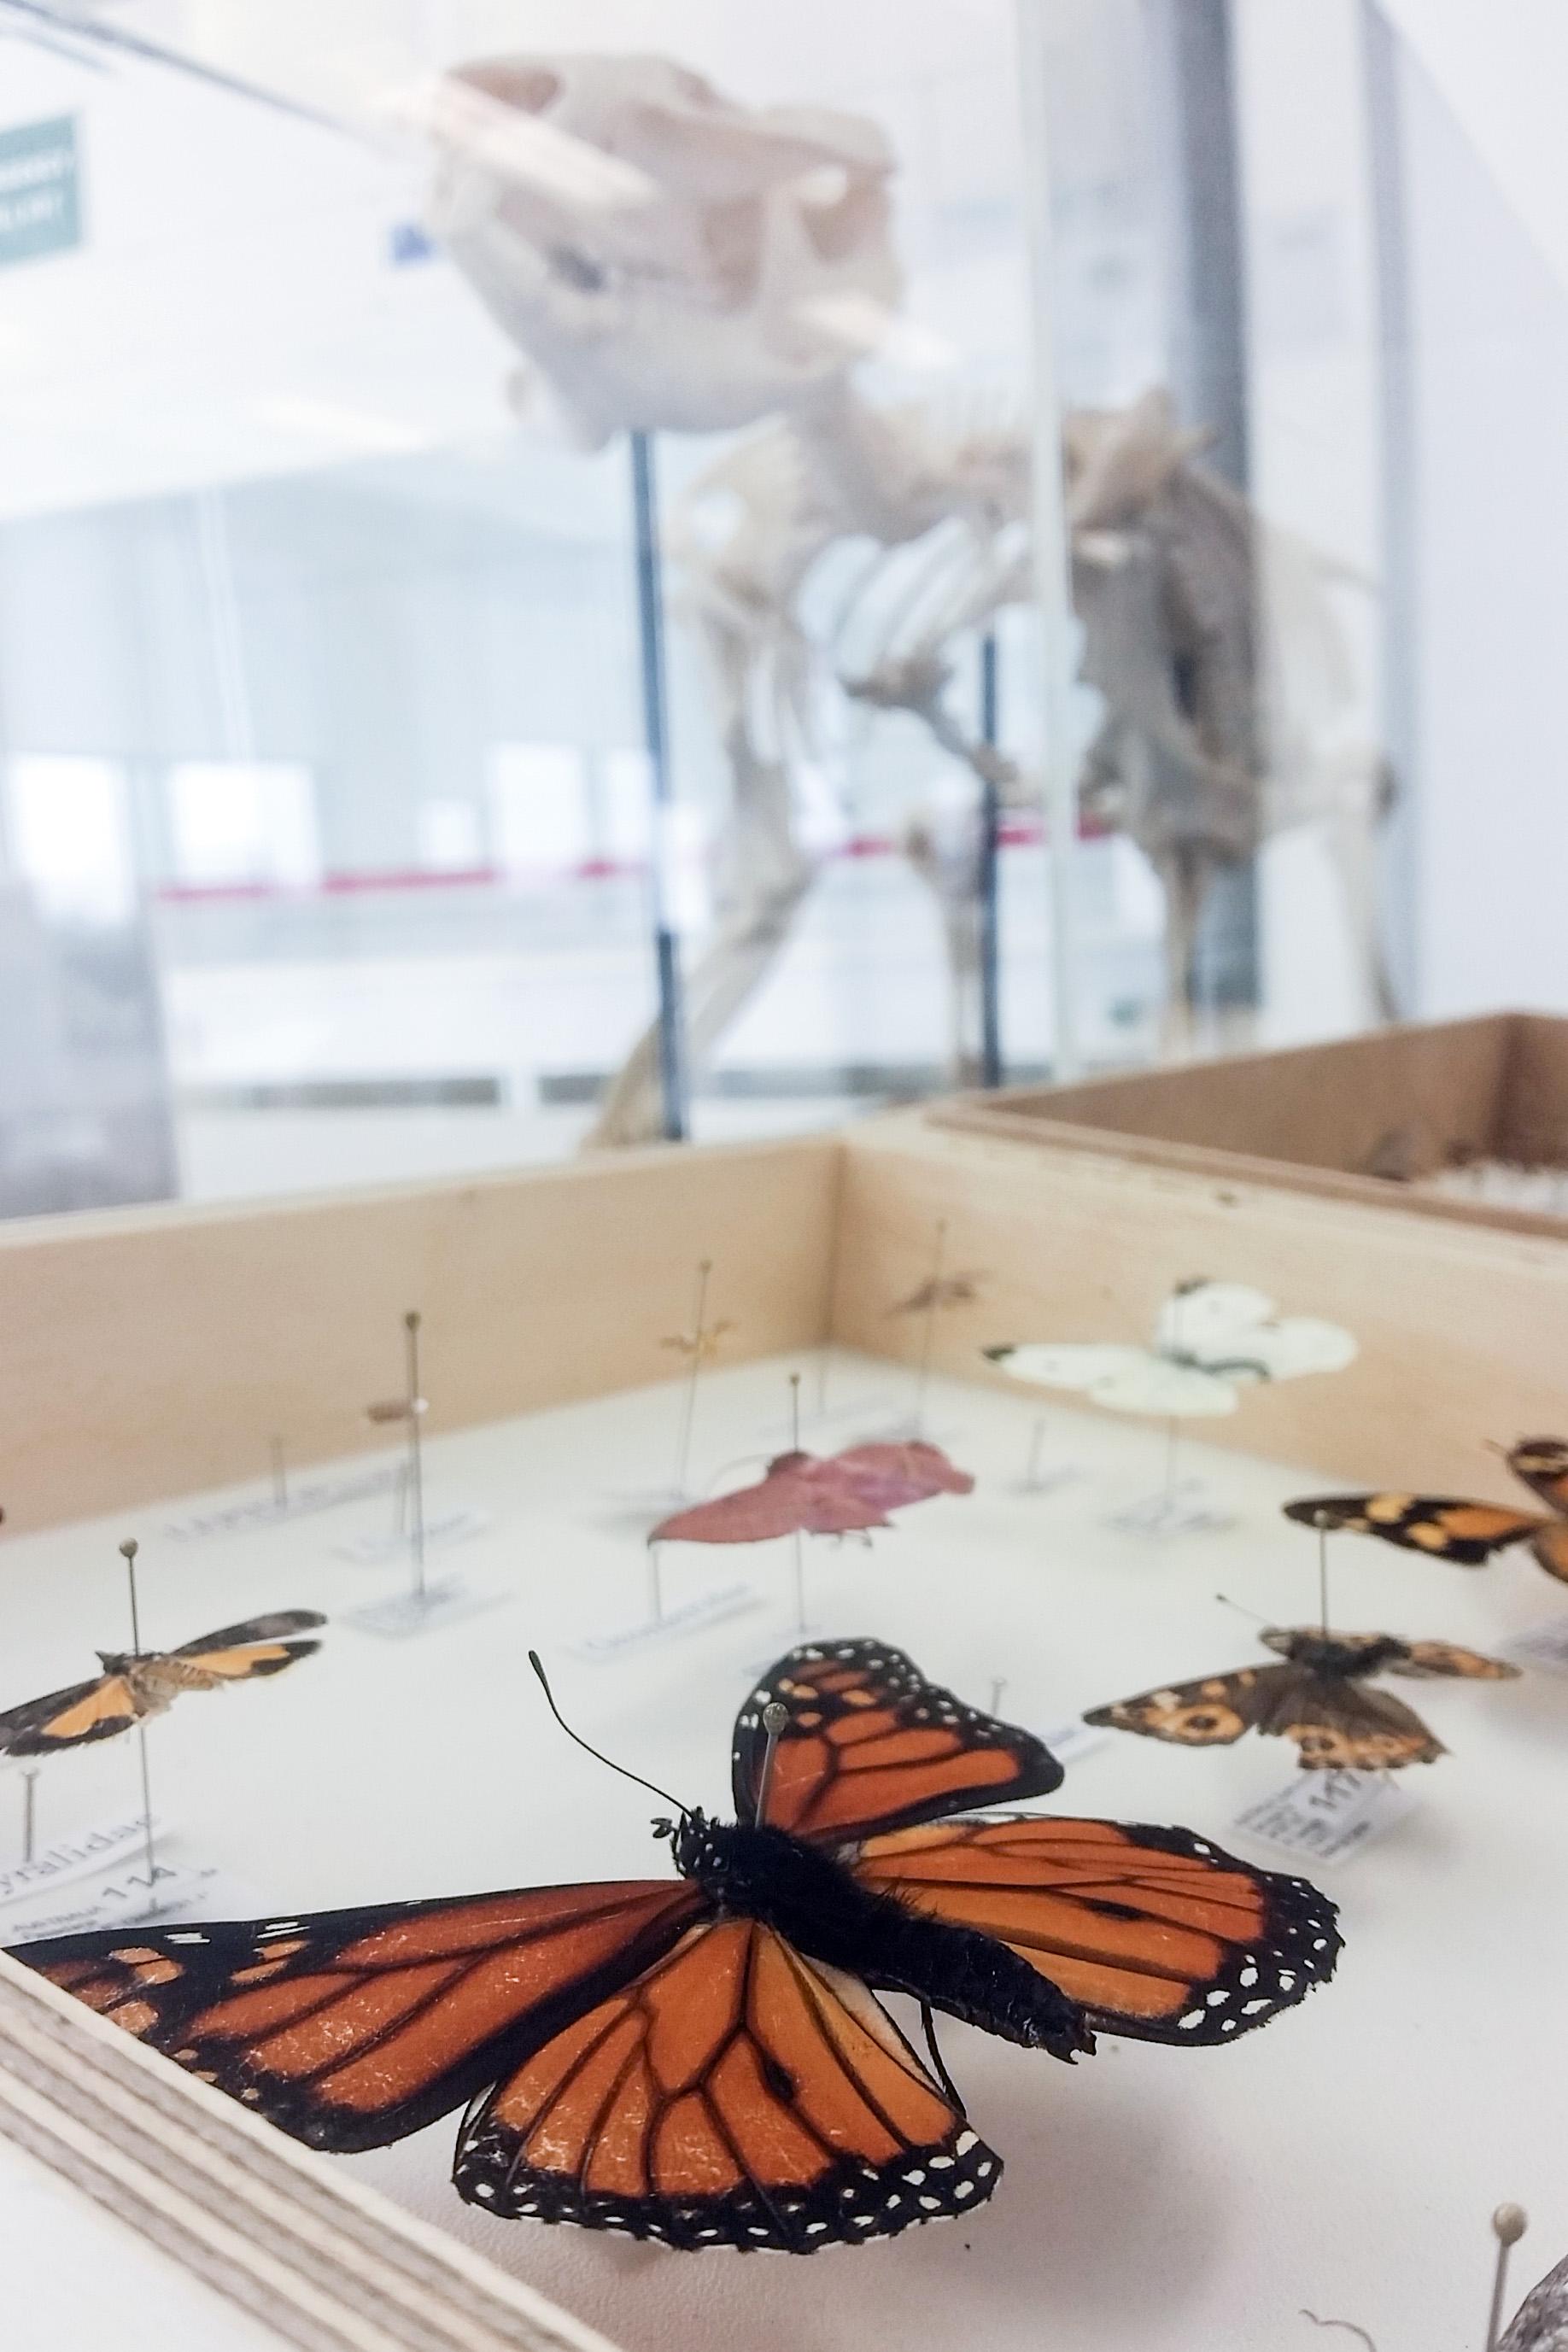 Collection of insects and skeletons, Braggs building